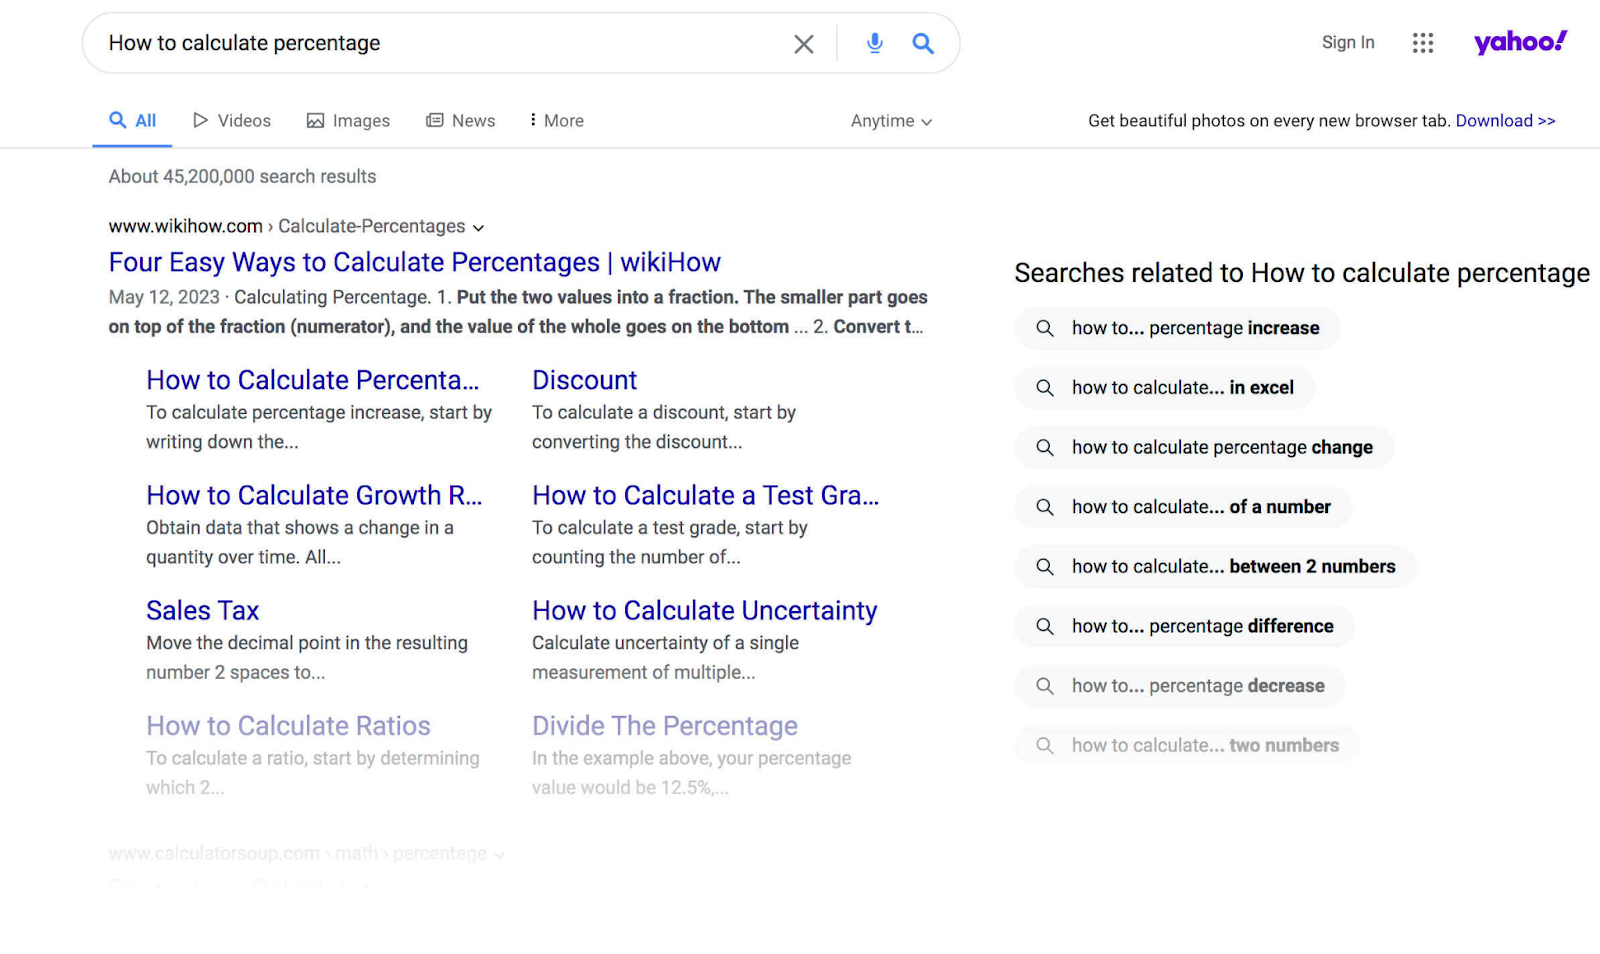 Yahoo’s search results for "how to calculate percentage"